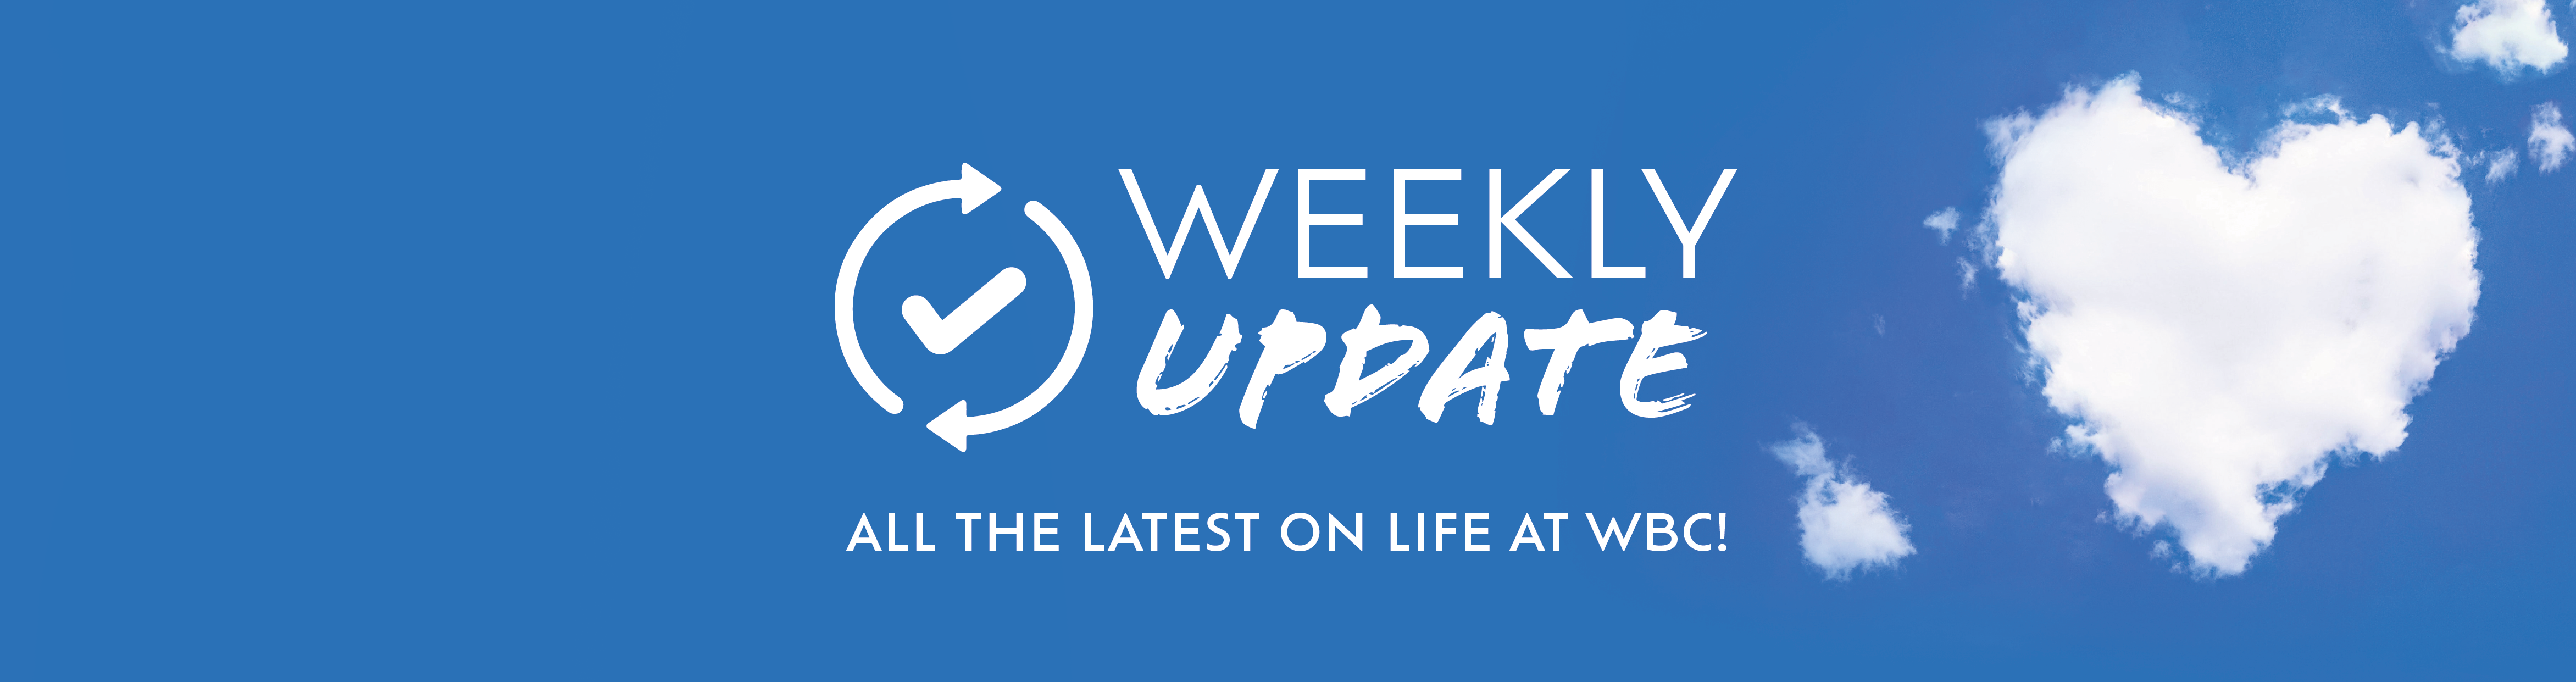 Weekly update banner.png